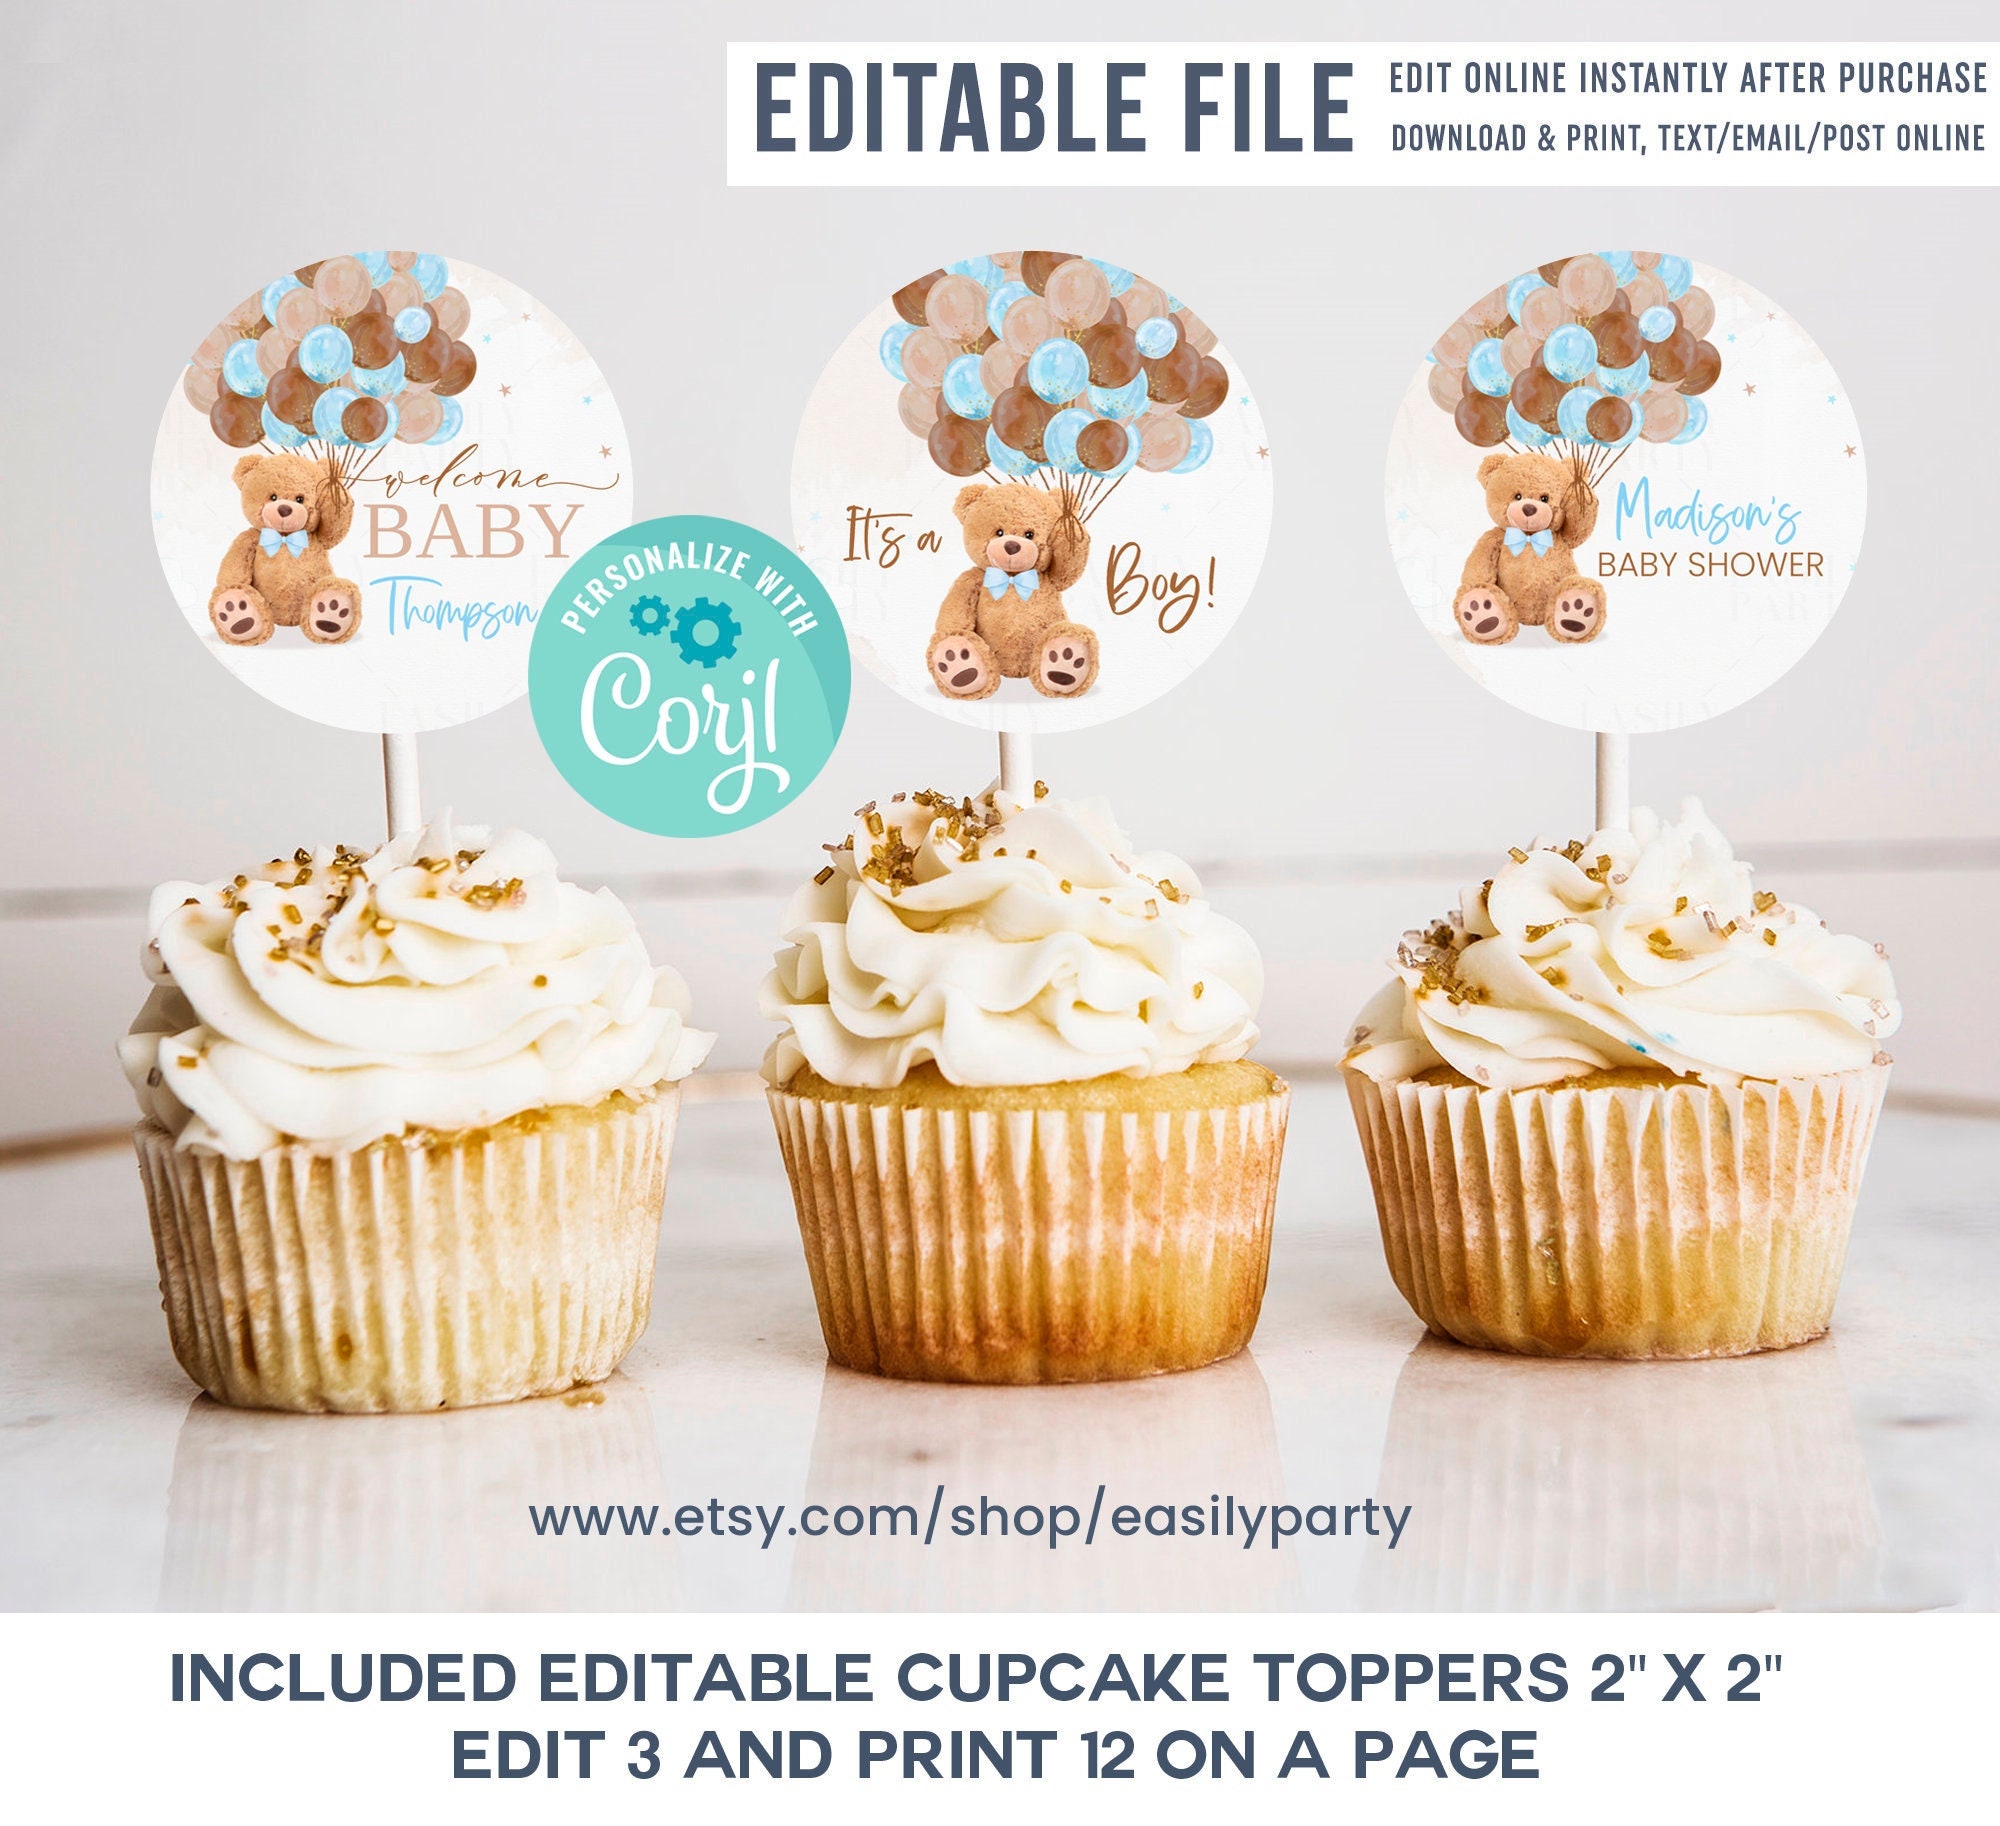 topyoursweets on X: Back at it.. edible cupcake toppers for